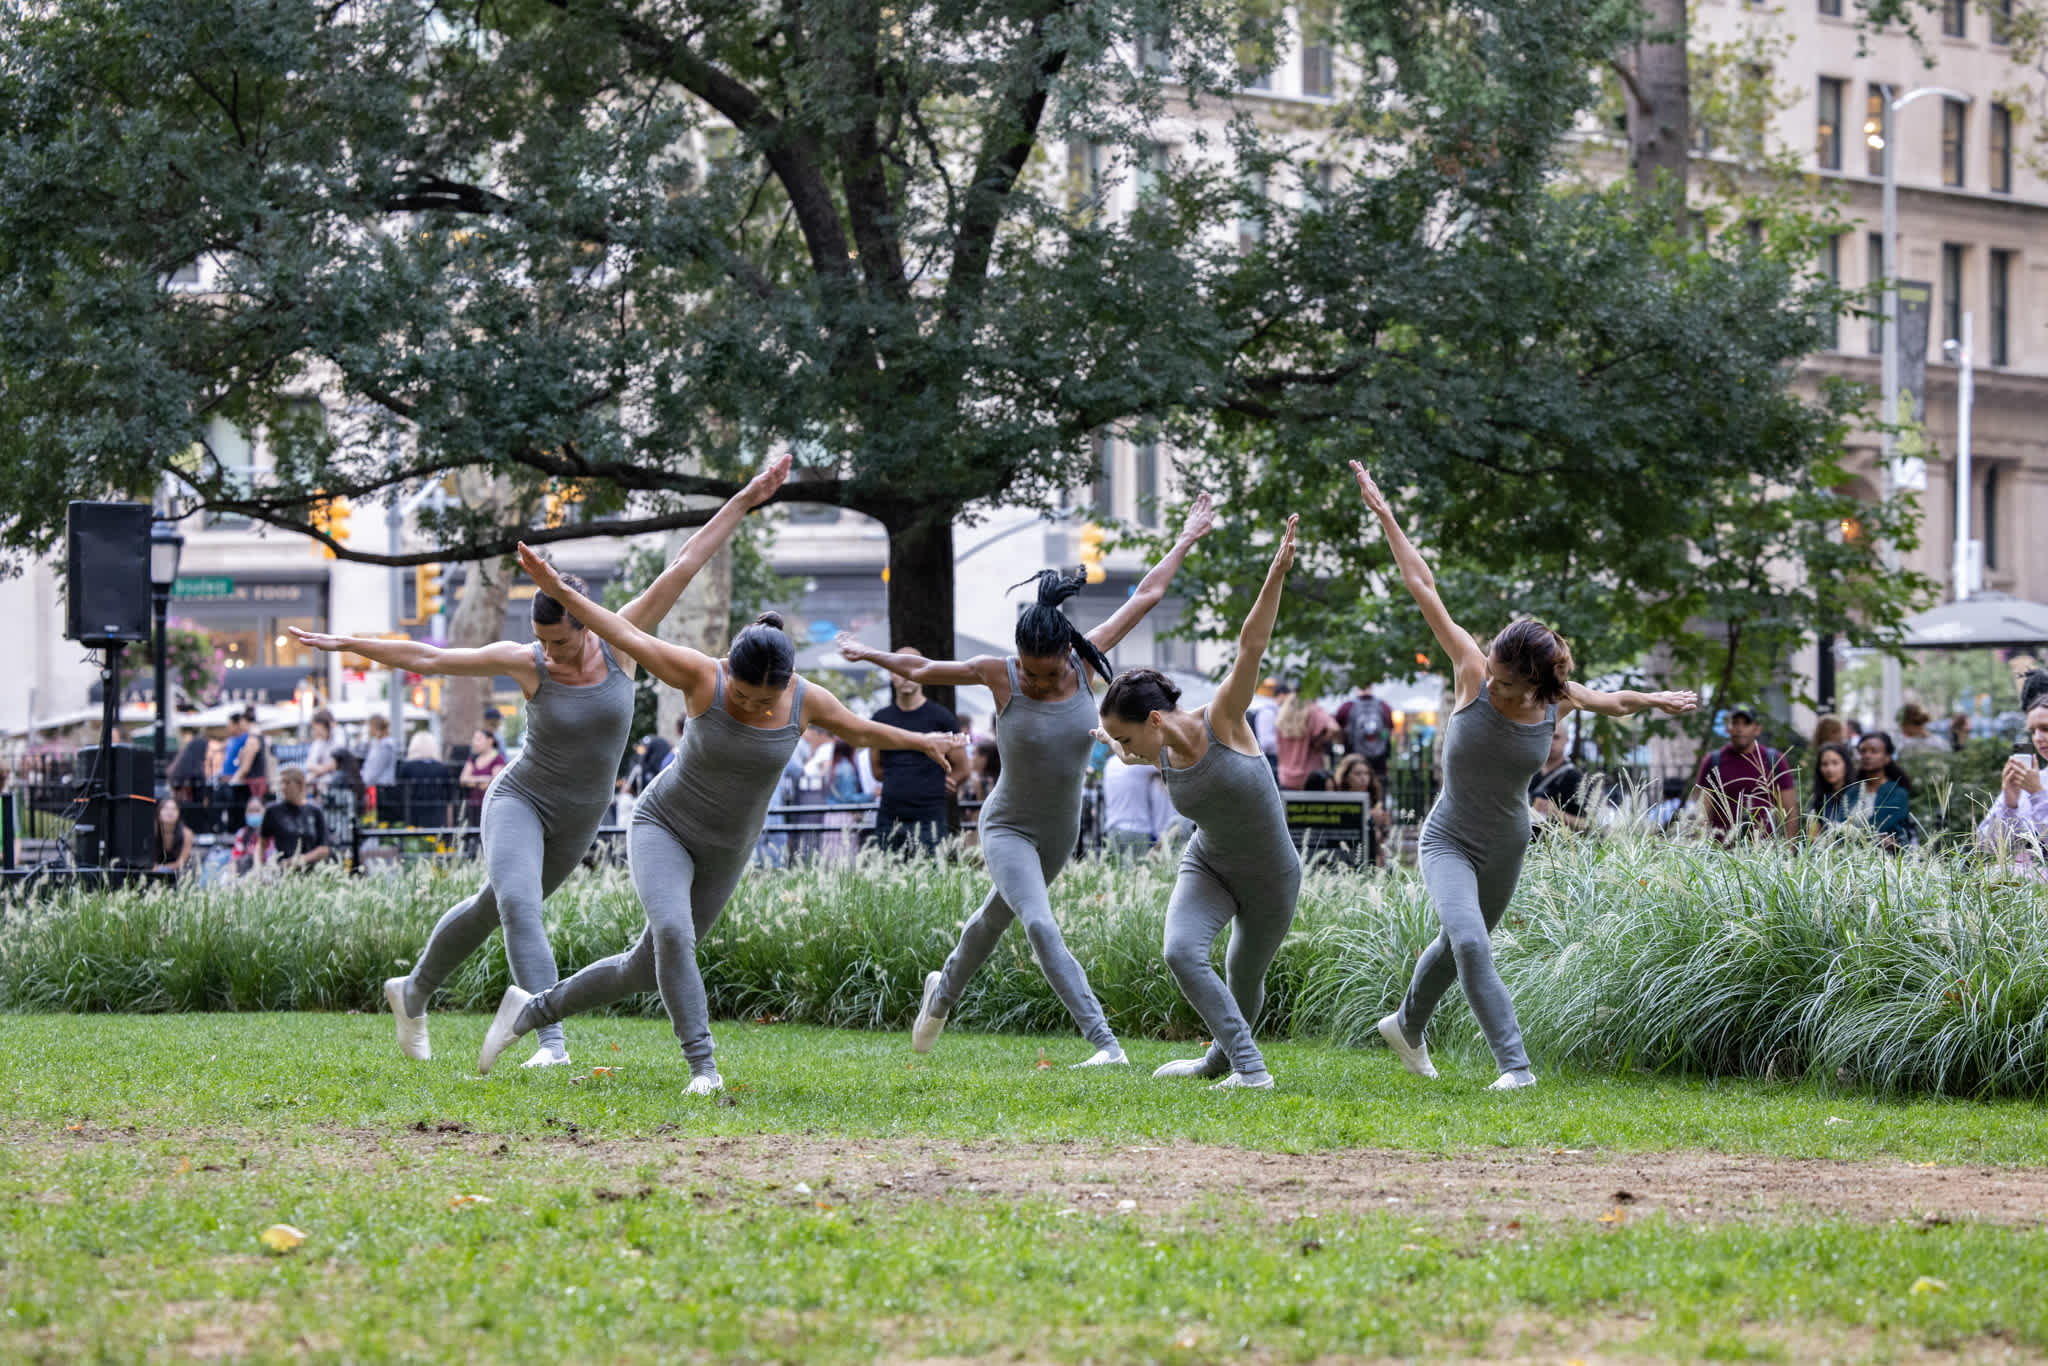 Five dancers in grey unitards appear in a staggered line, each holding the same pose: right foot extended back on a diagonal, arms outstretched at an angle. The dancers are on grass in a park, with a row of tall grass behind them. Audience members stand and watch in the background.